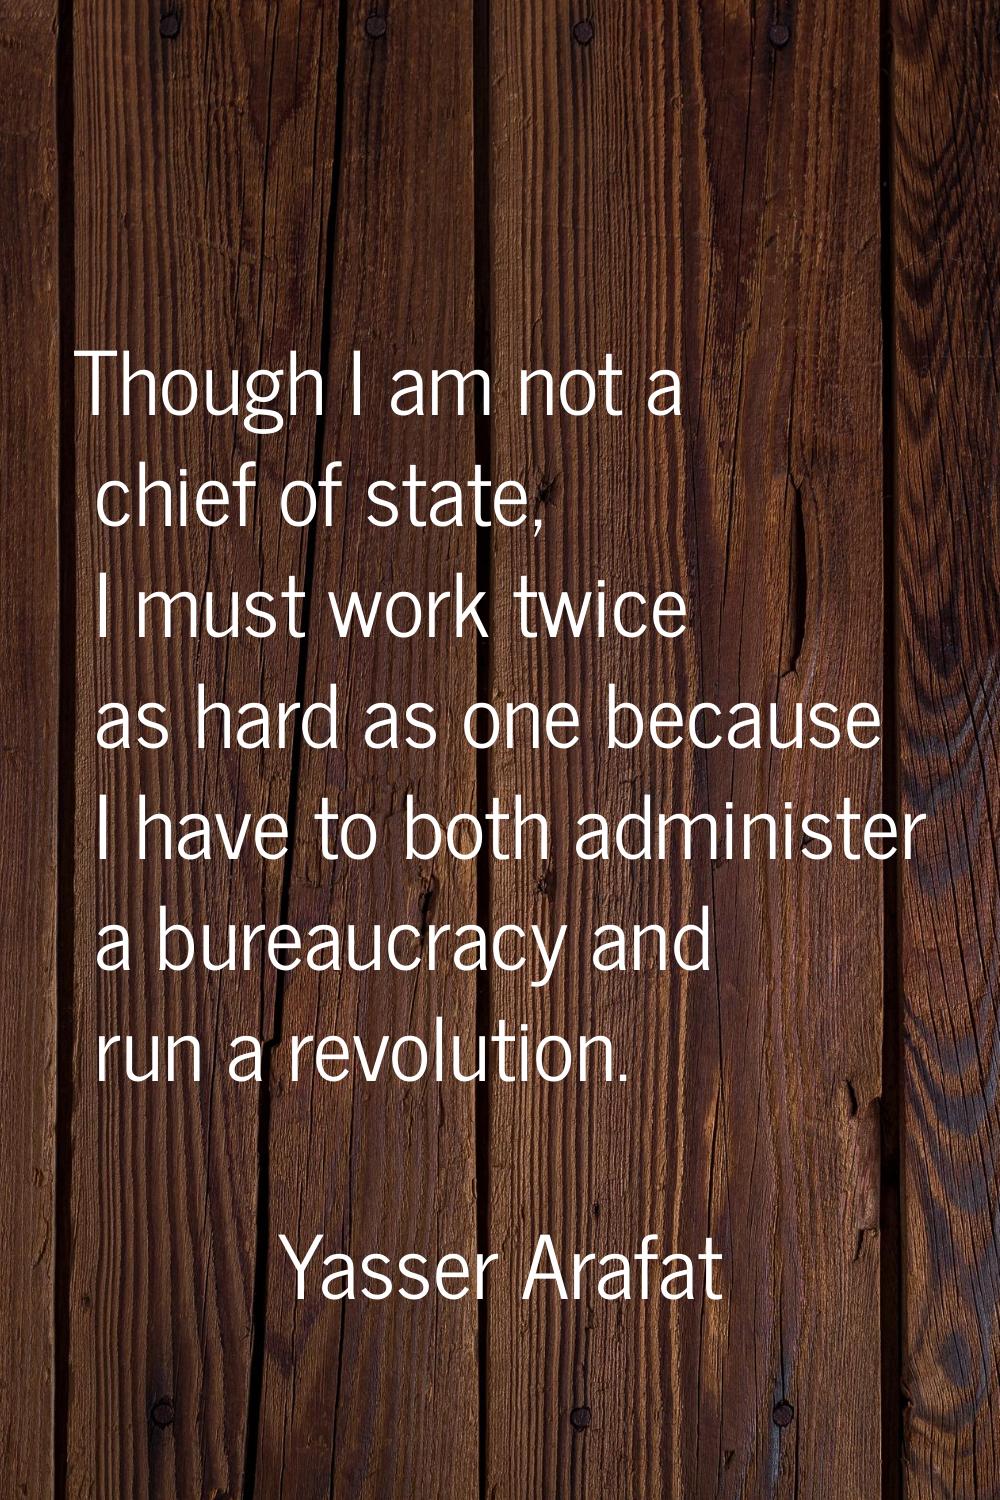 Though I am not a chief of state, I must work twice as hard as one because I have to both administe